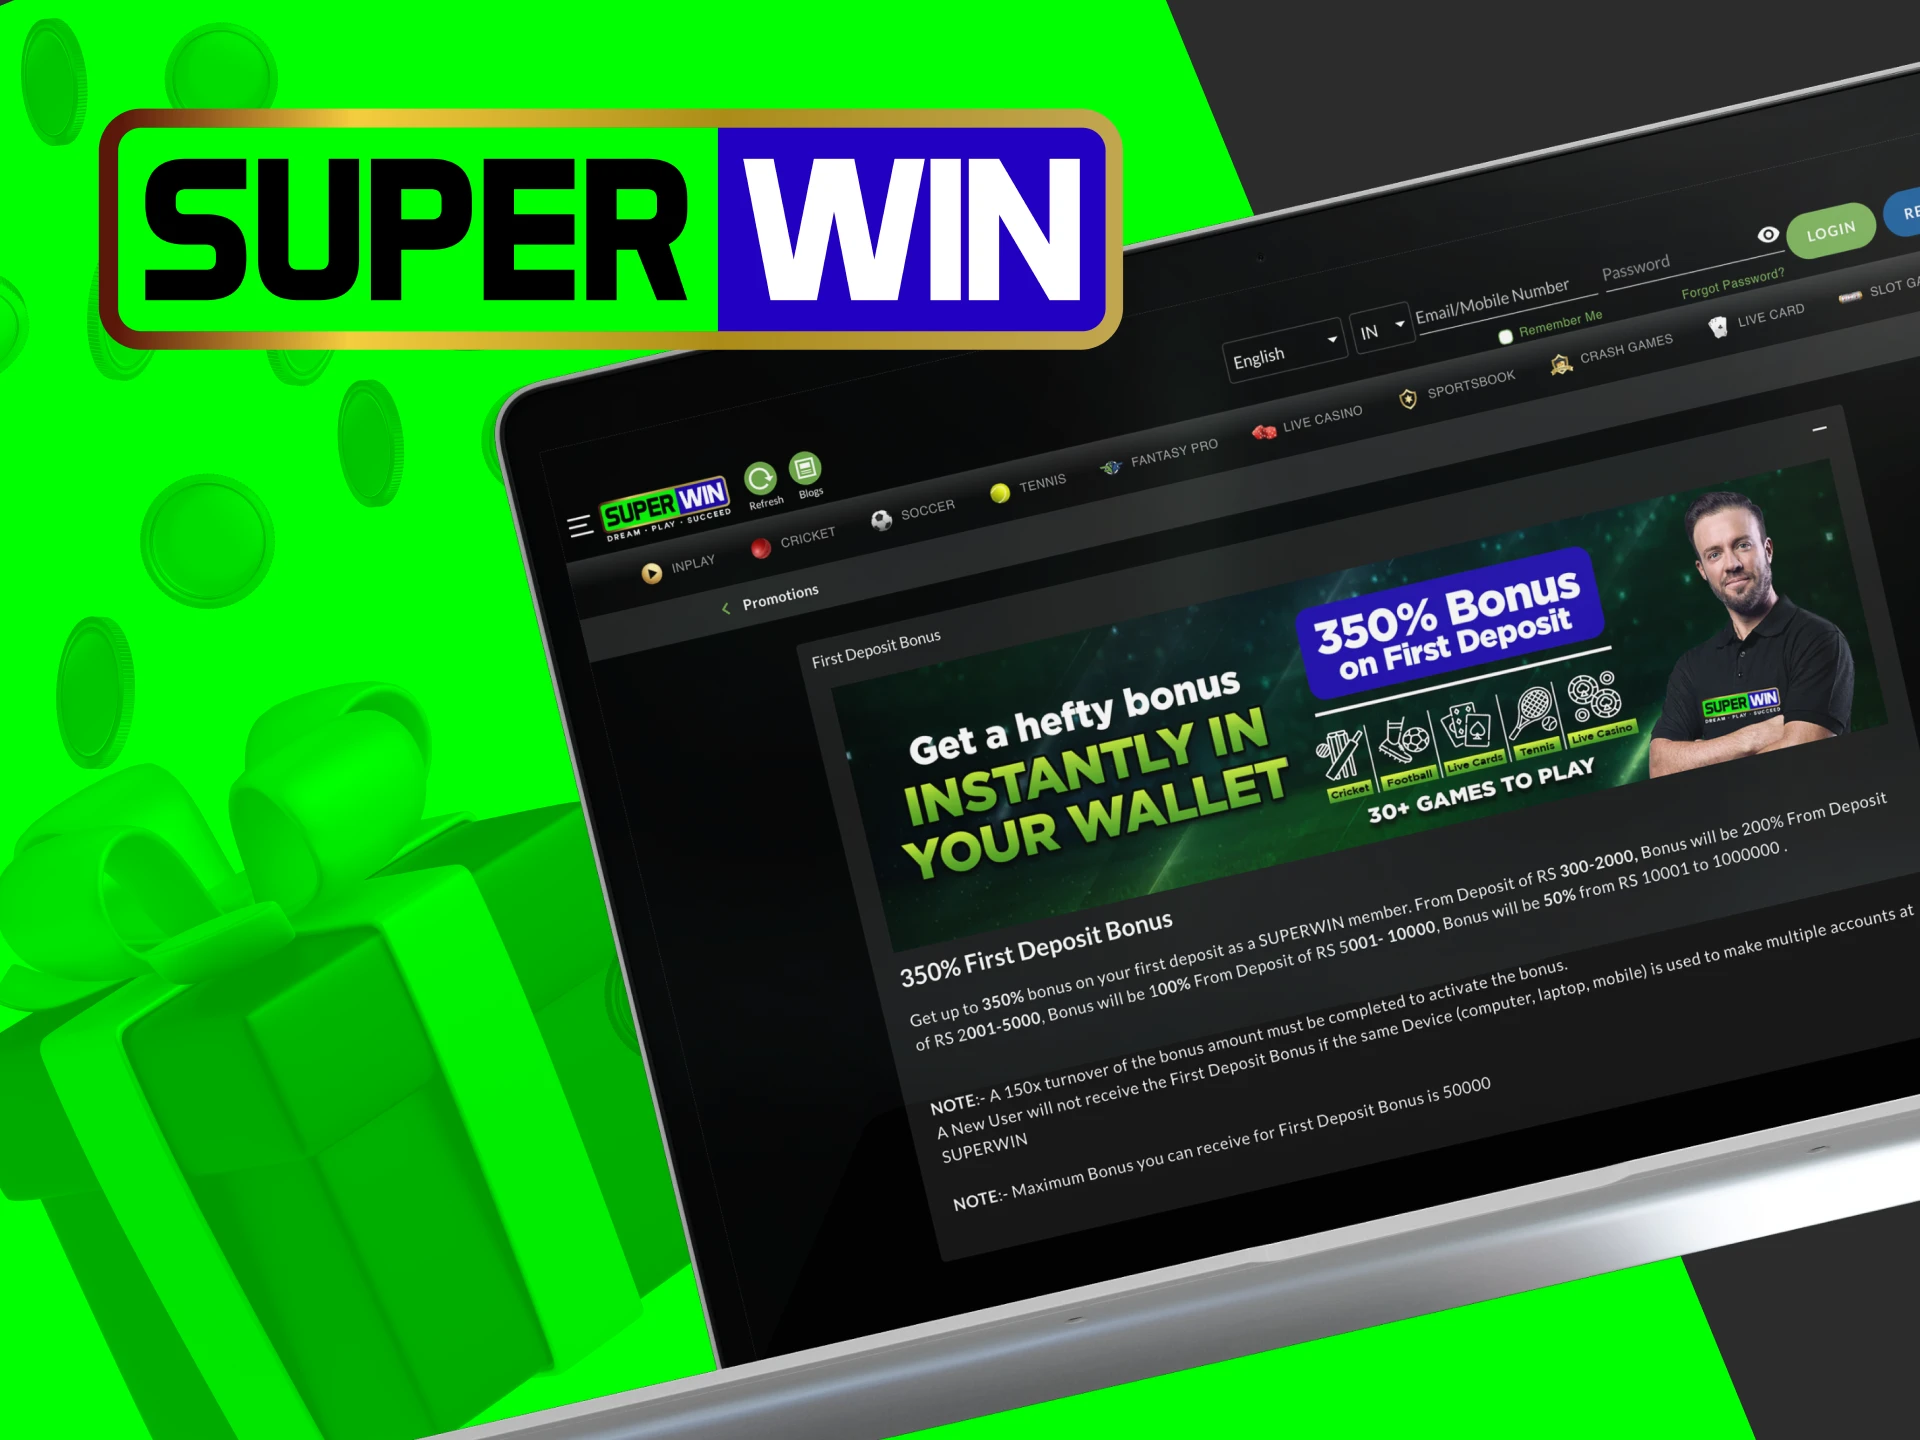 What bonuses can I get at SuperWin online casino.